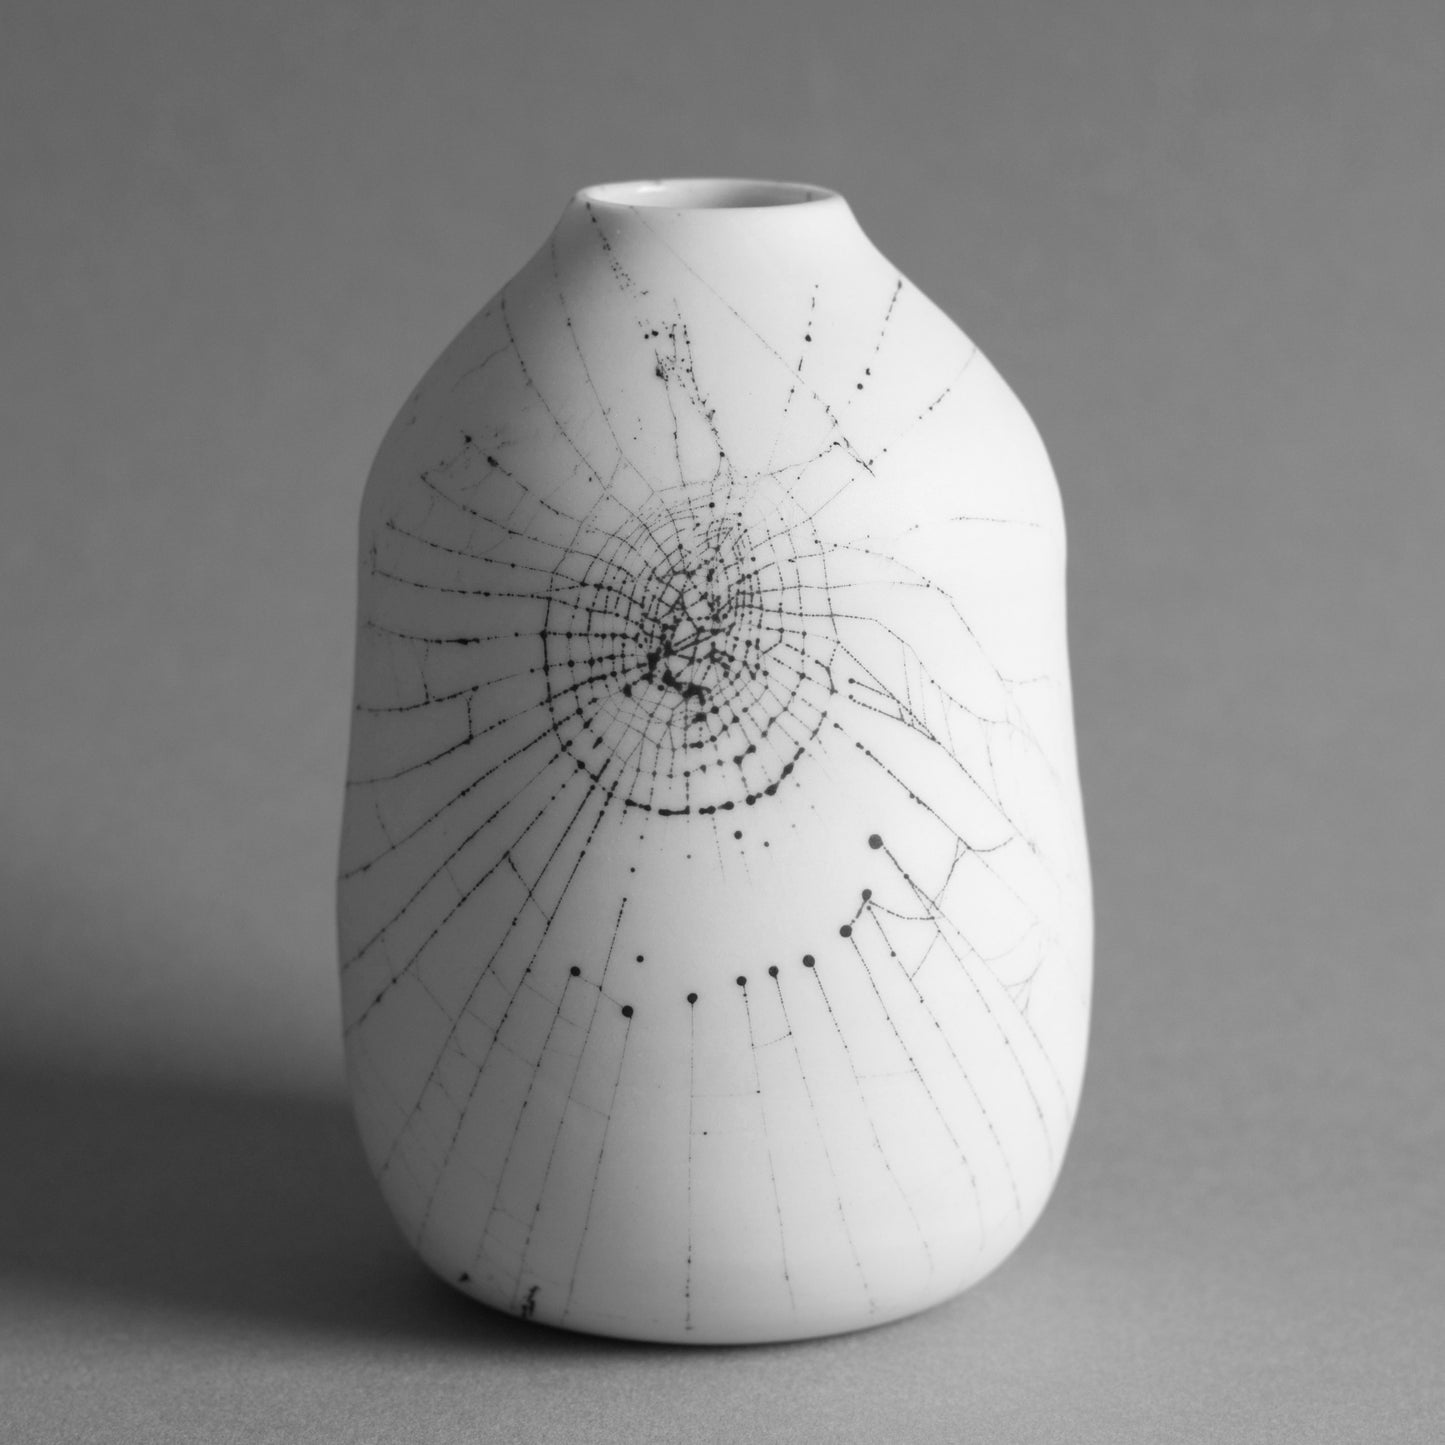 Web on Clay (050), Collected August 25, 2022